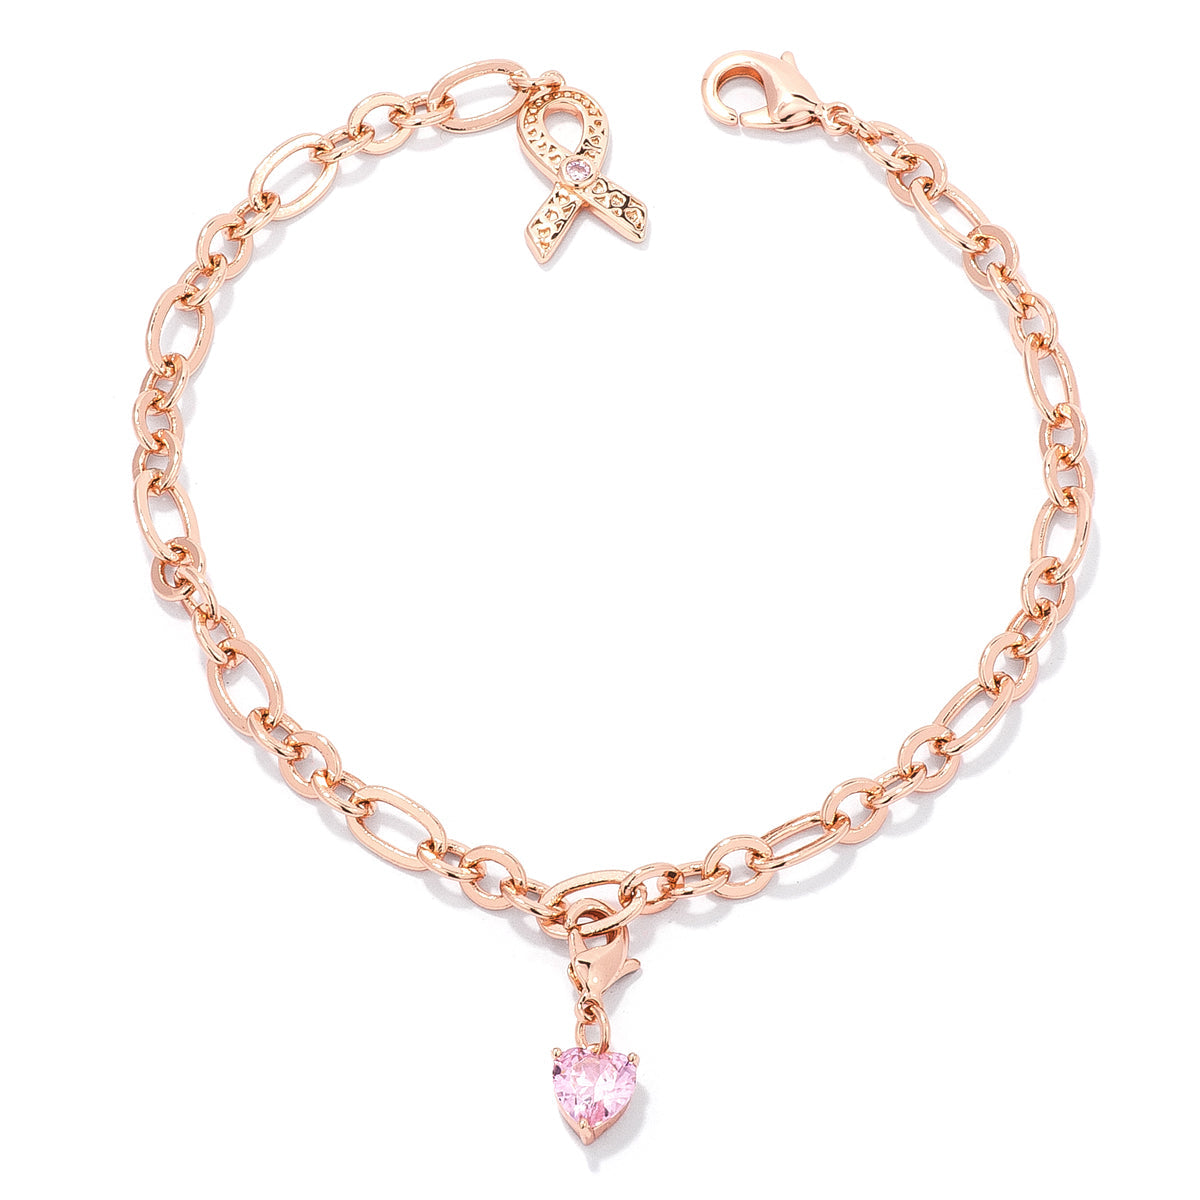 Precious Stars Silver or Goldplated Breast Cancer Awareness Ribbon Bracelet